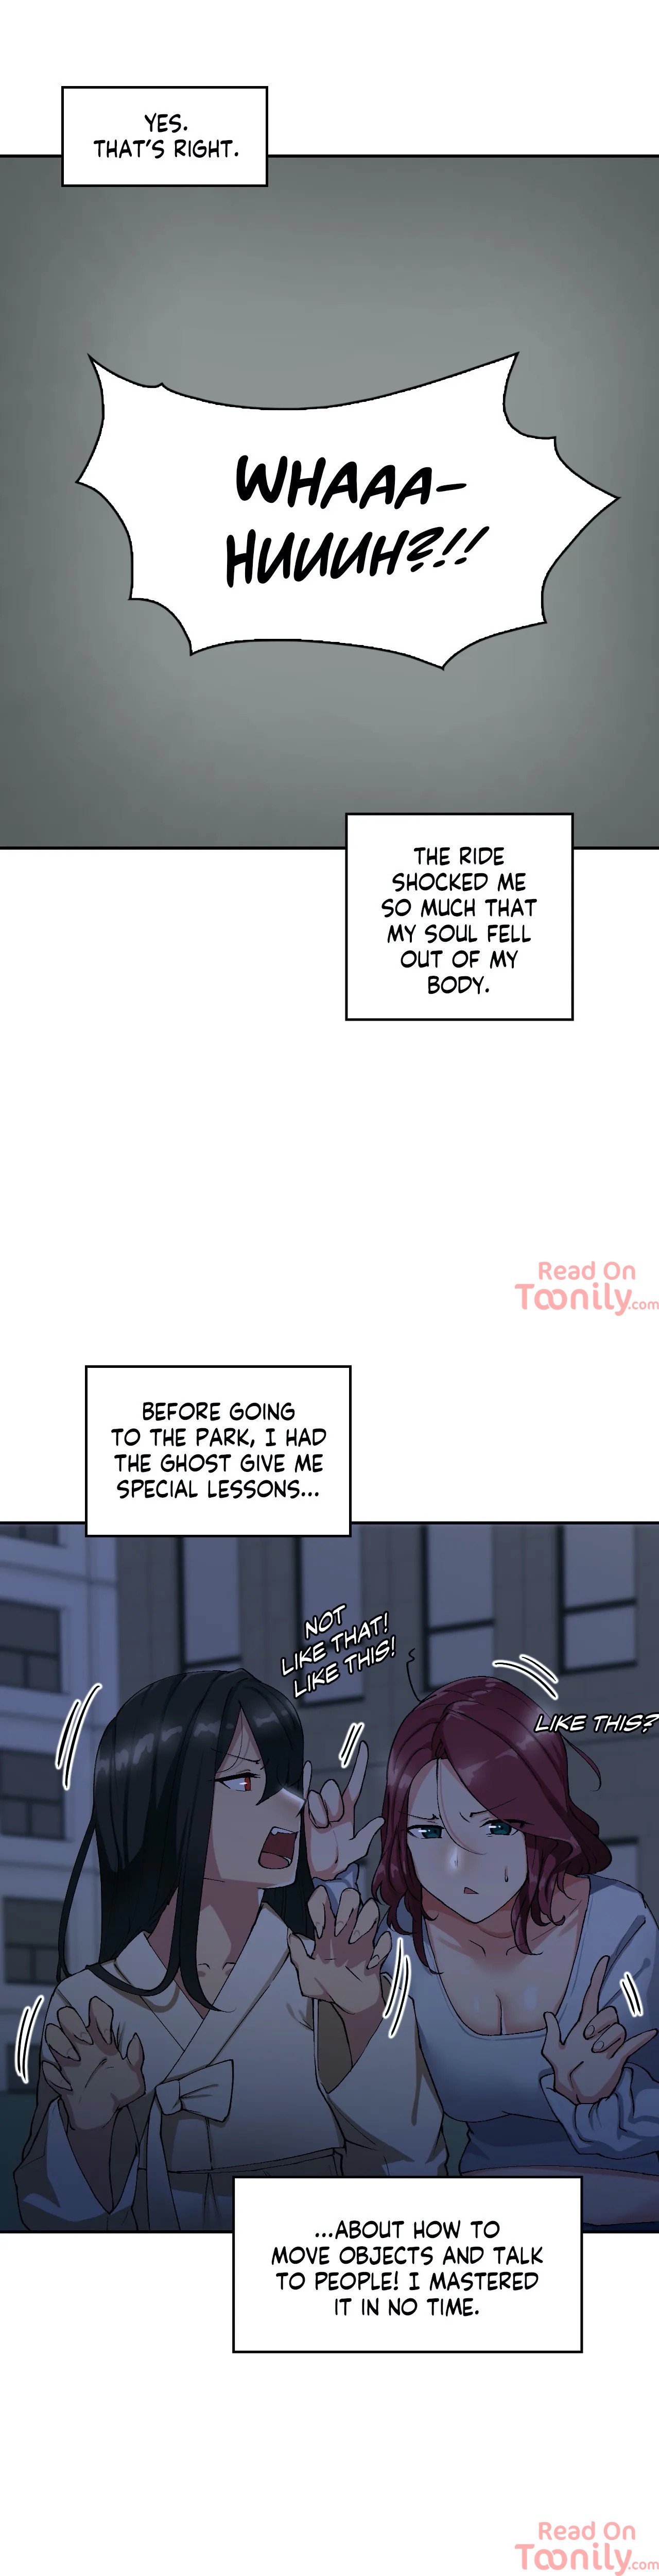 The Girl Hiding in the Wall - Chapter 13 Page 17